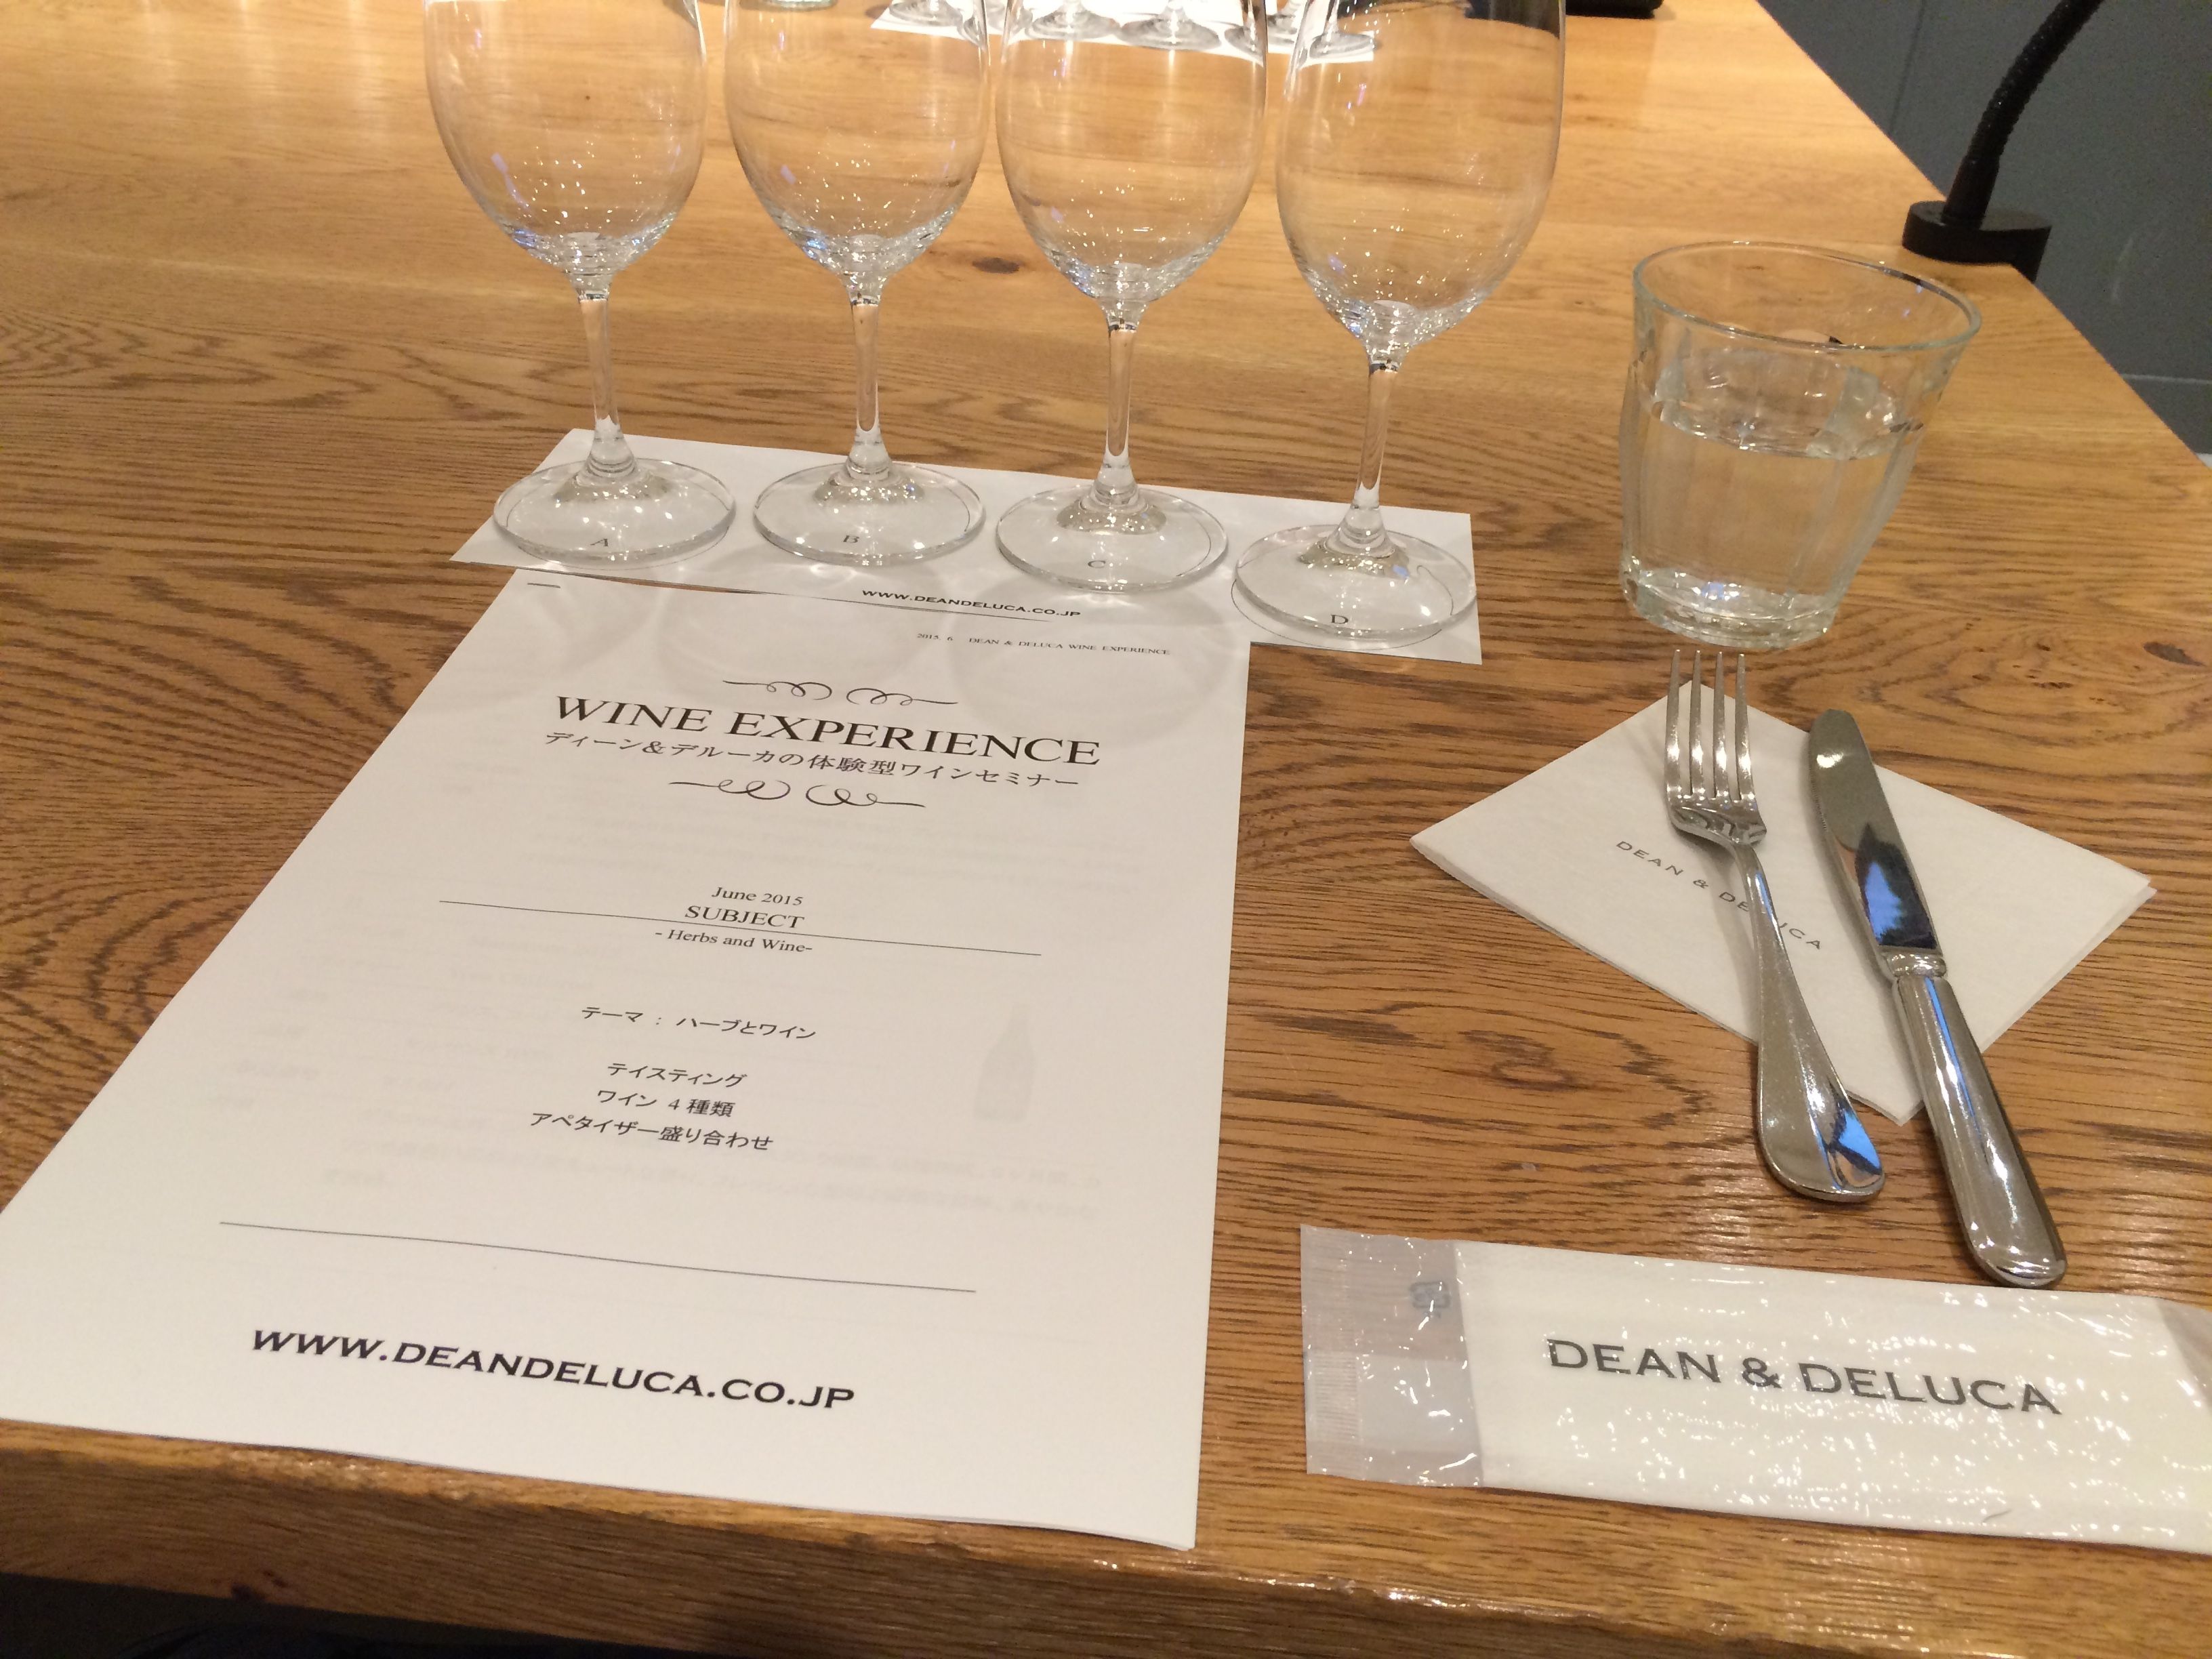 Dean Deluca Wine Experience Herbs And Wine 料理 ワイン にらやマリアージュ研究室